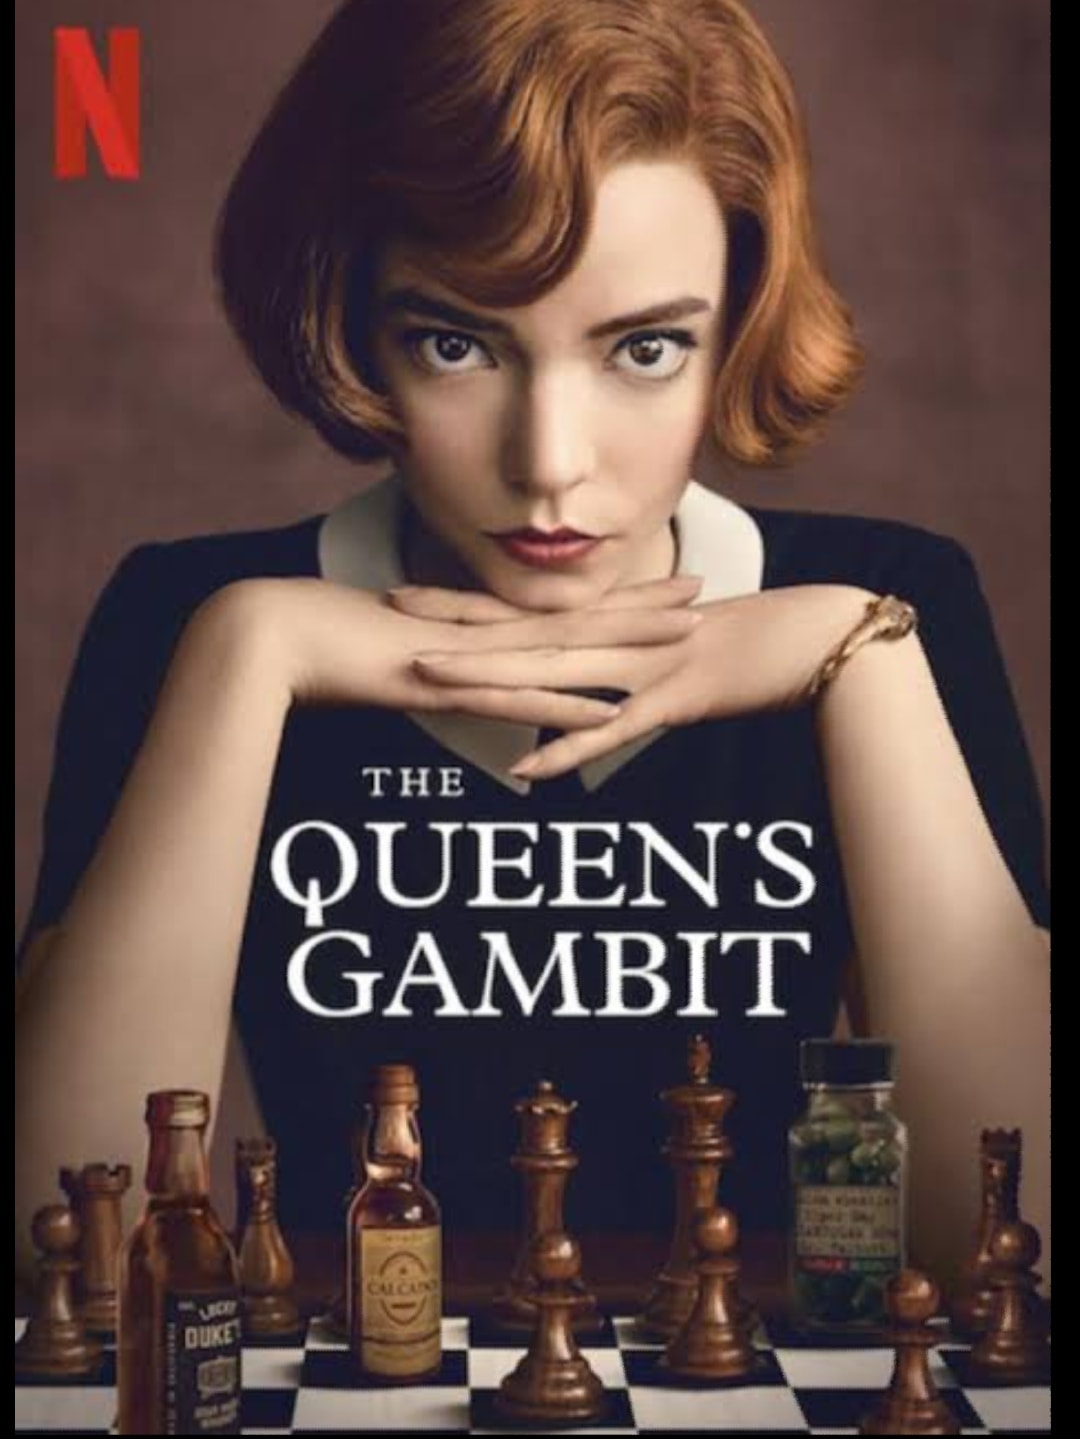 a passion to win and only win-The Queen's Gambit